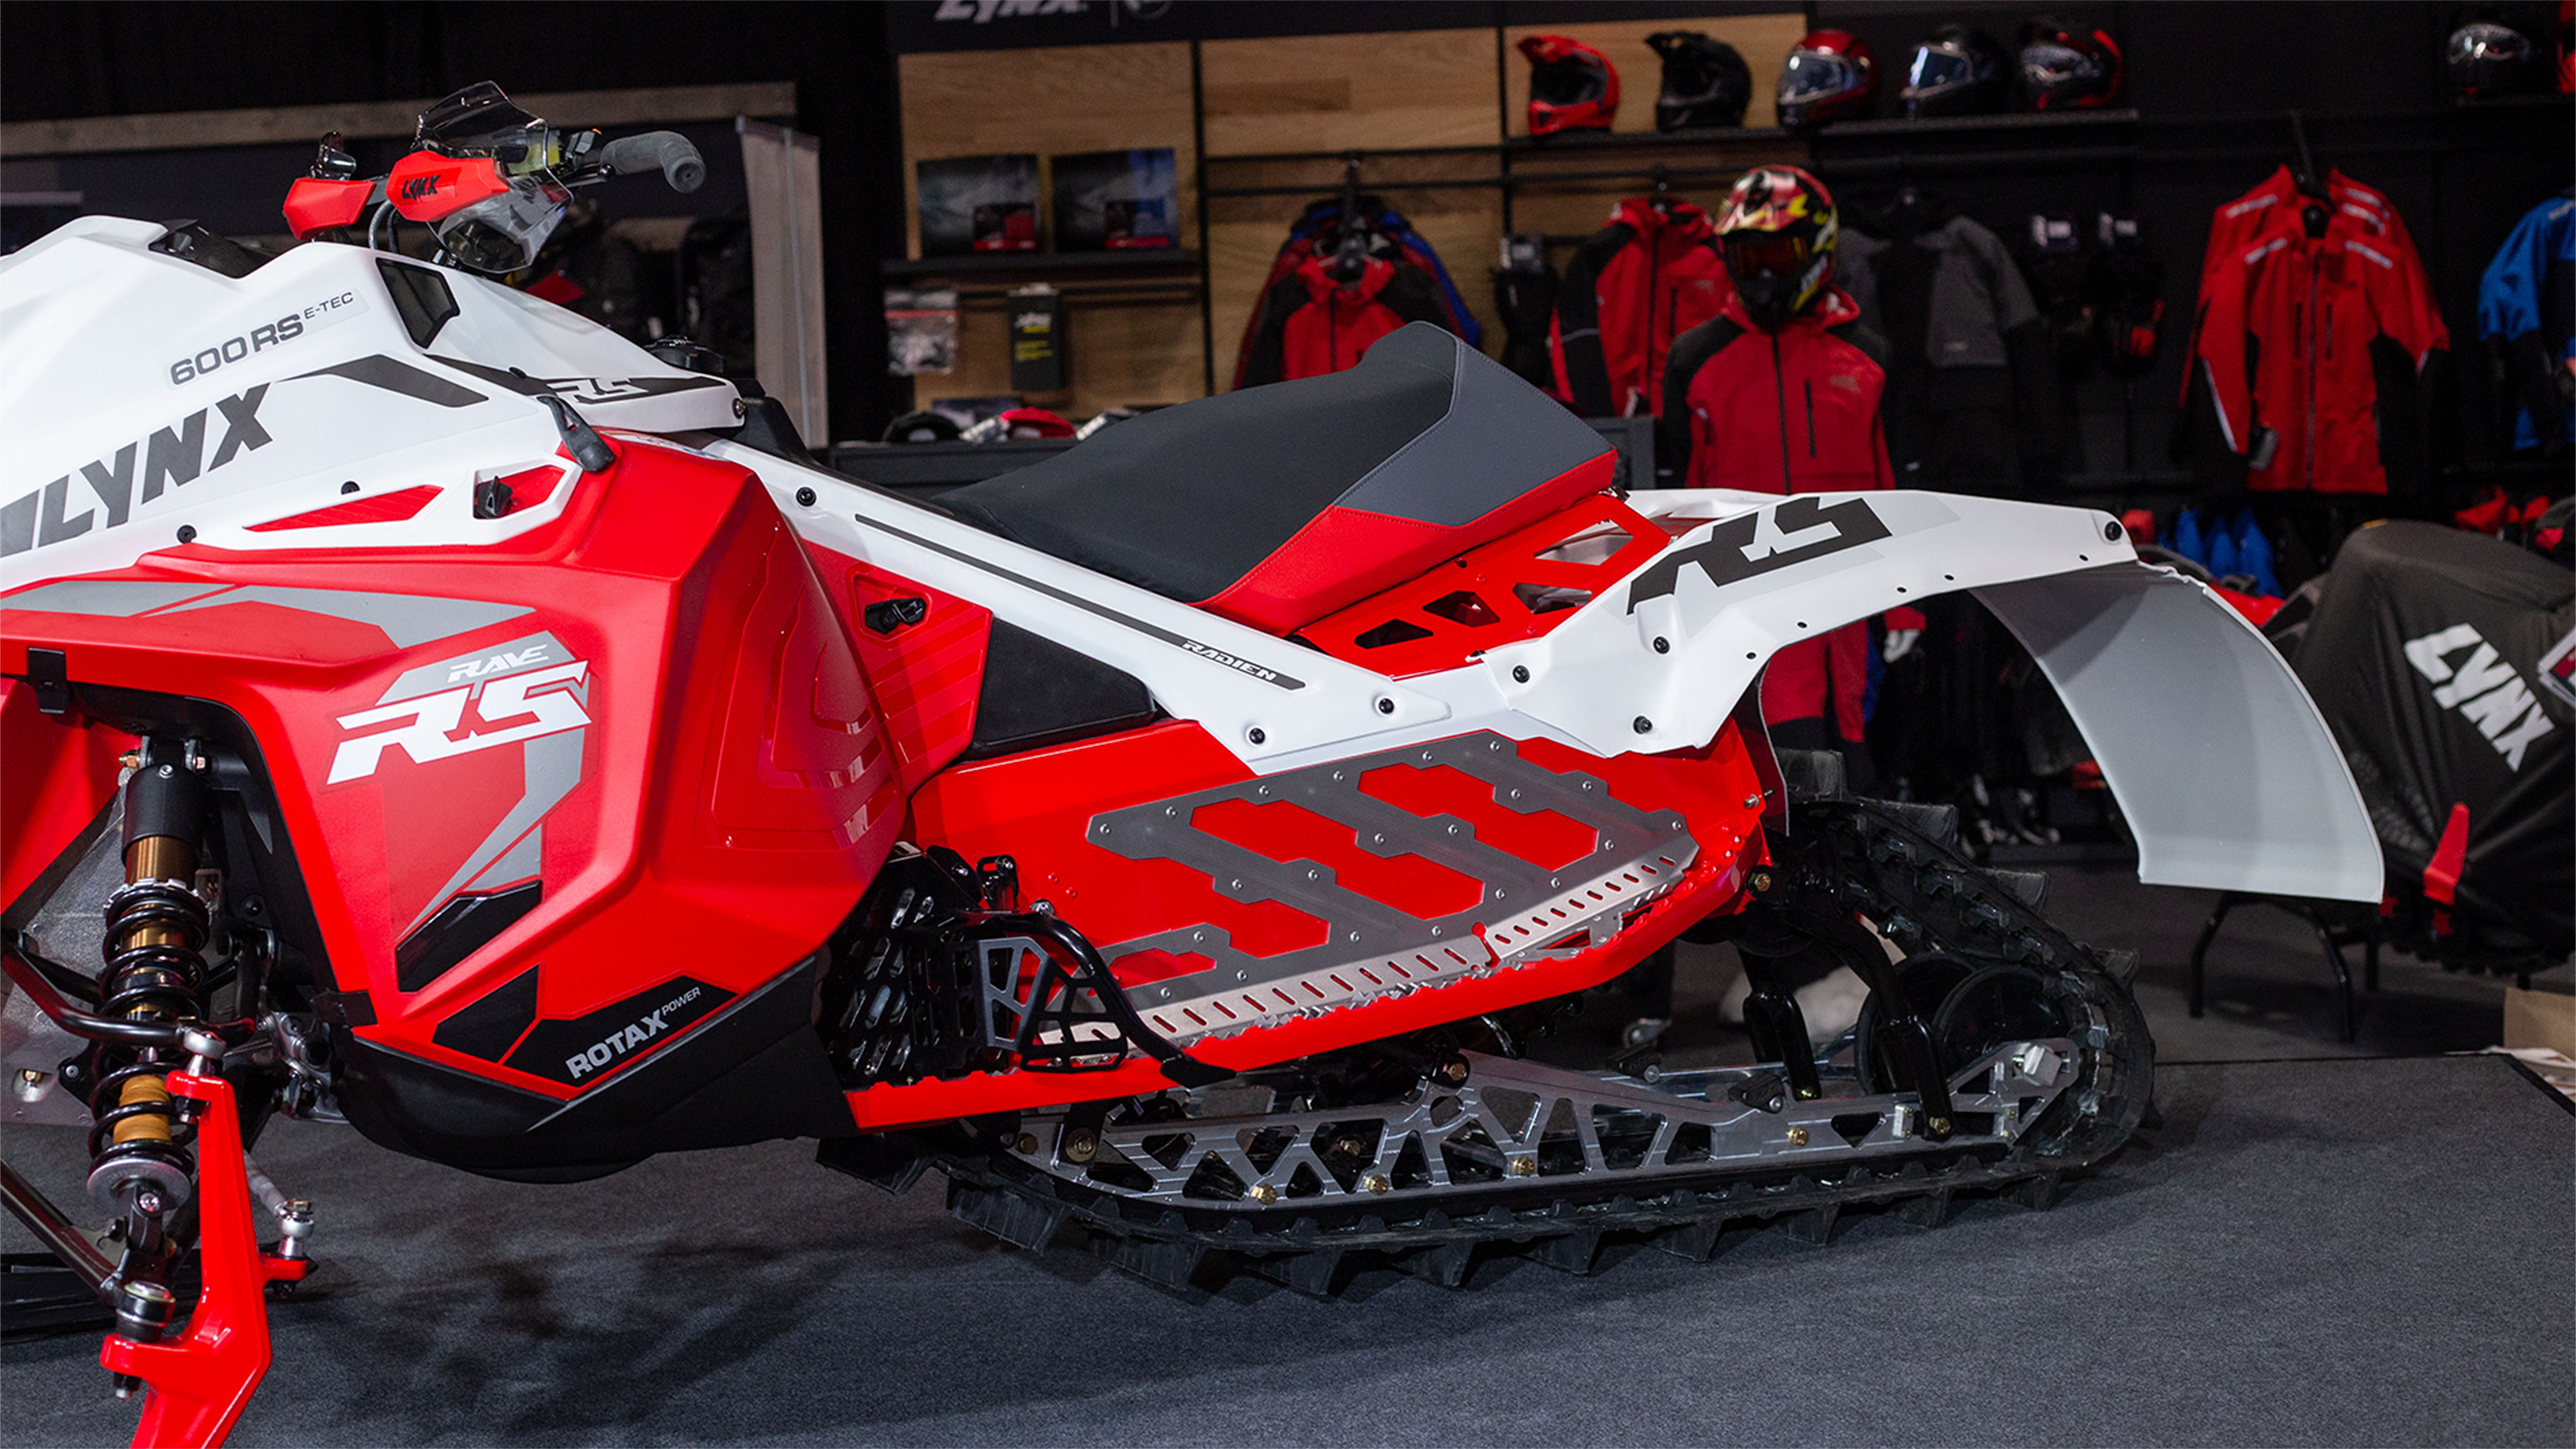 Radien-RS chassis of Lynx Rave RS racing snowmobile